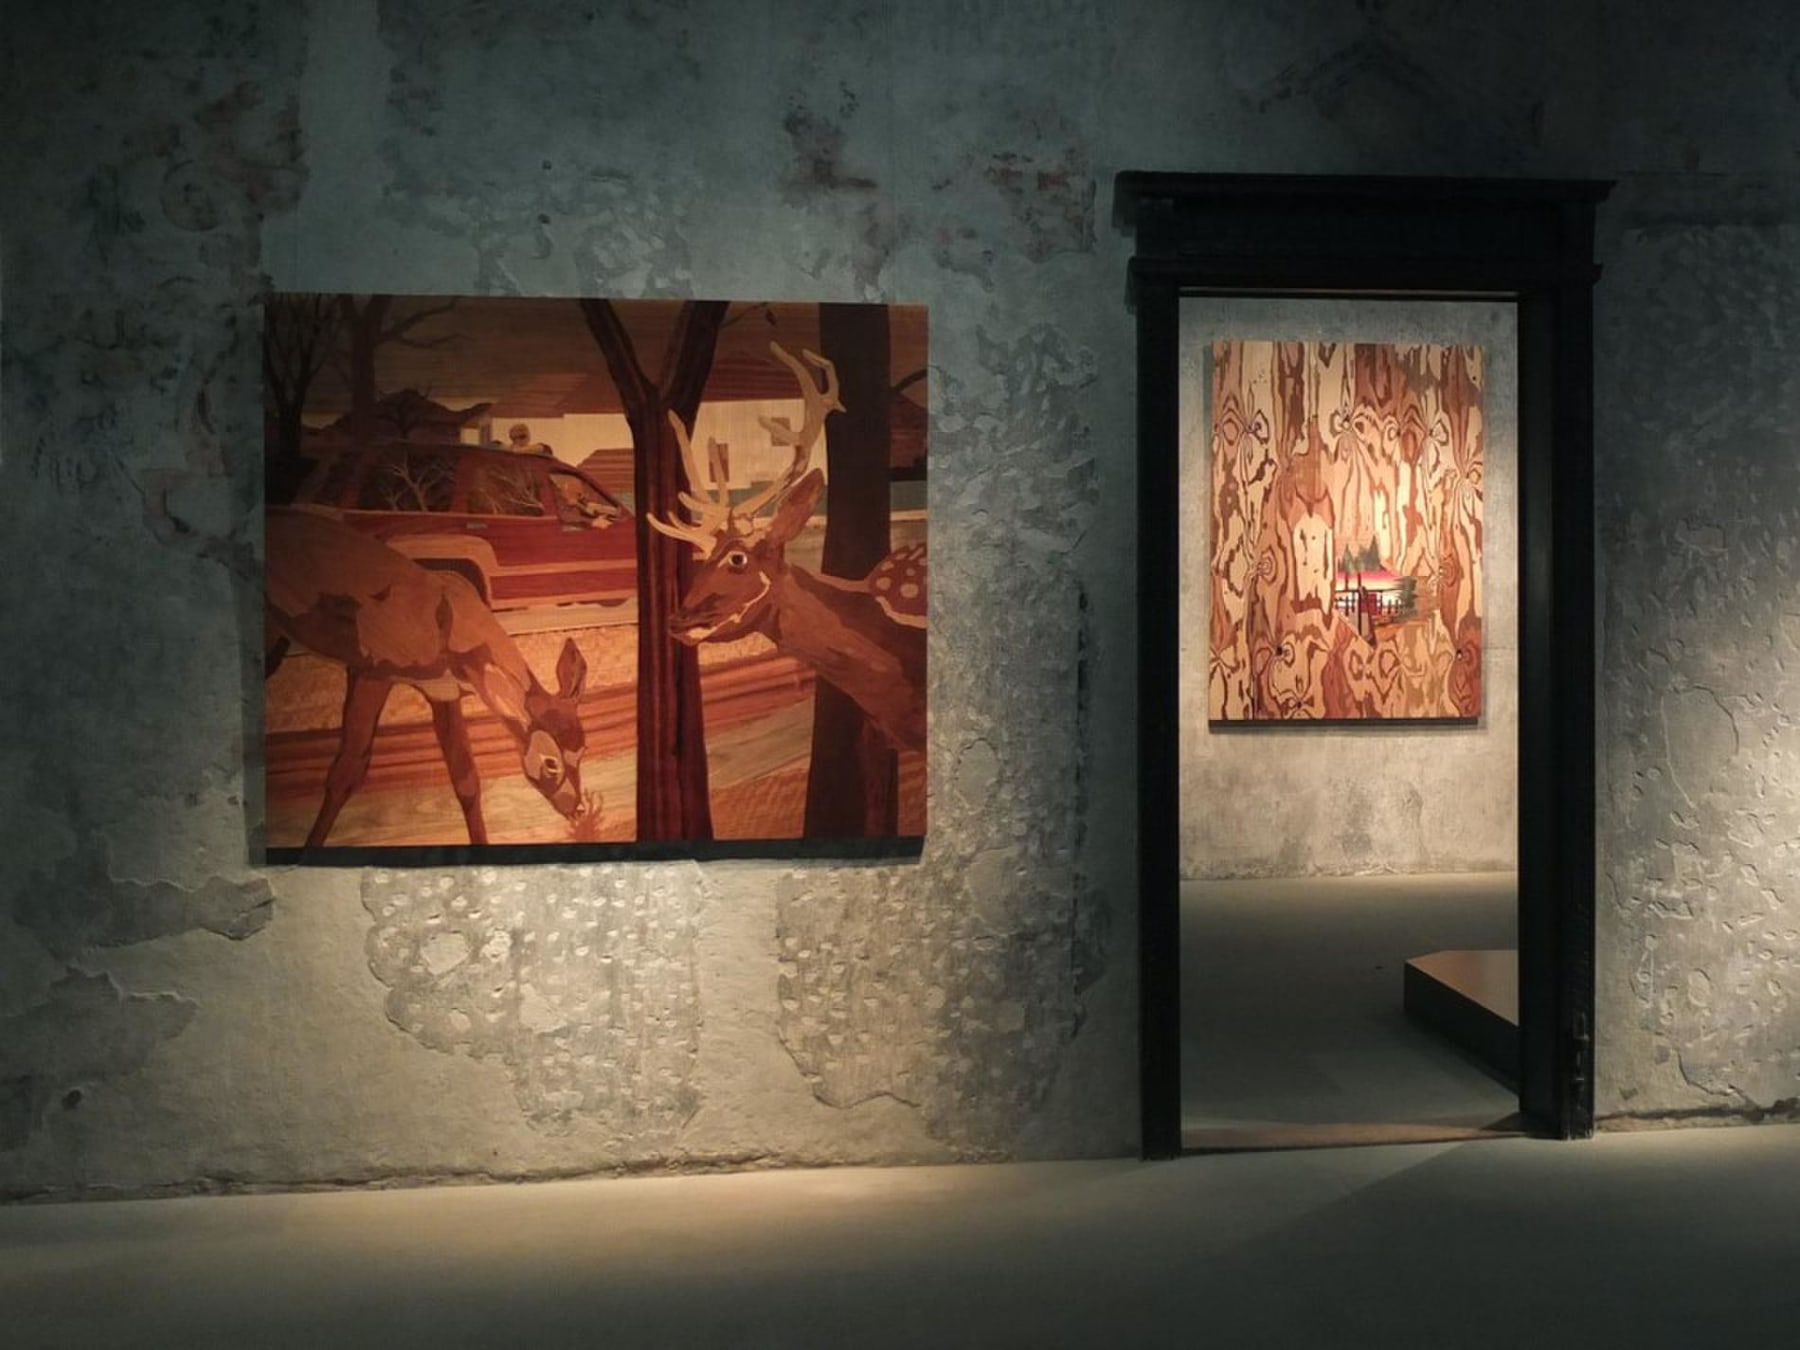 exhibition of wooden artworks